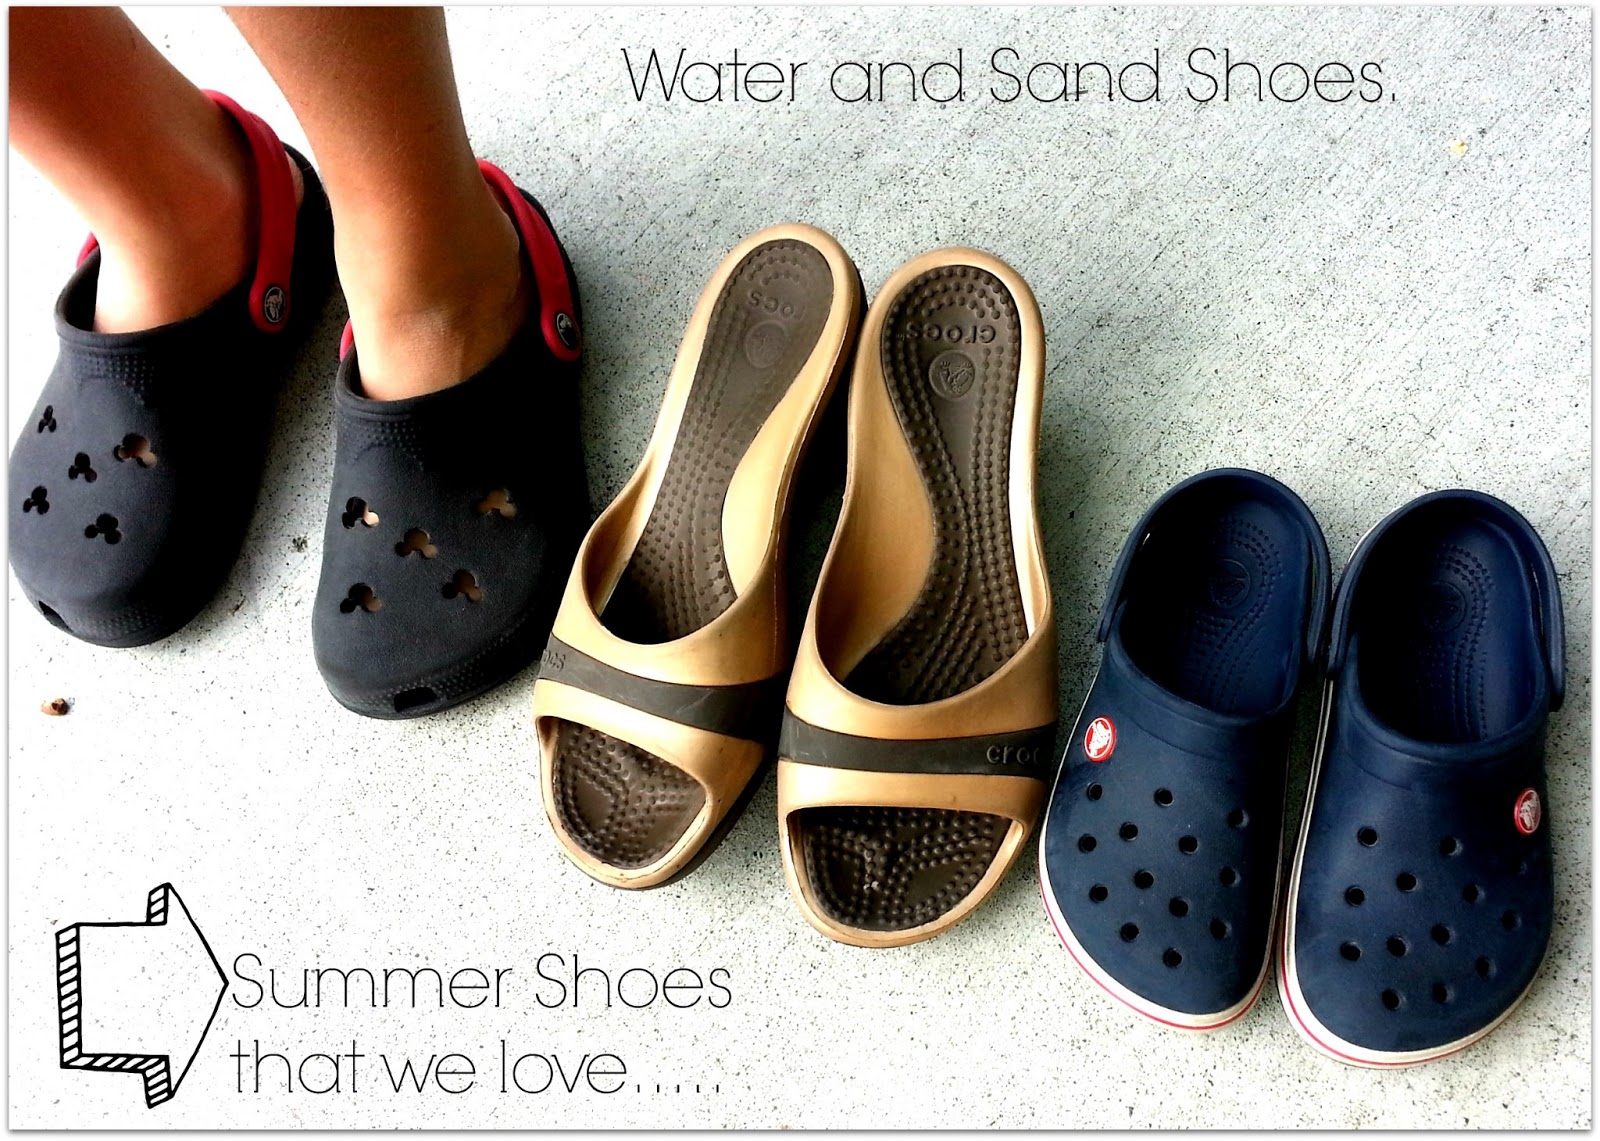 Summer Shoes perfect for Water and Sand - Crocs Shoes